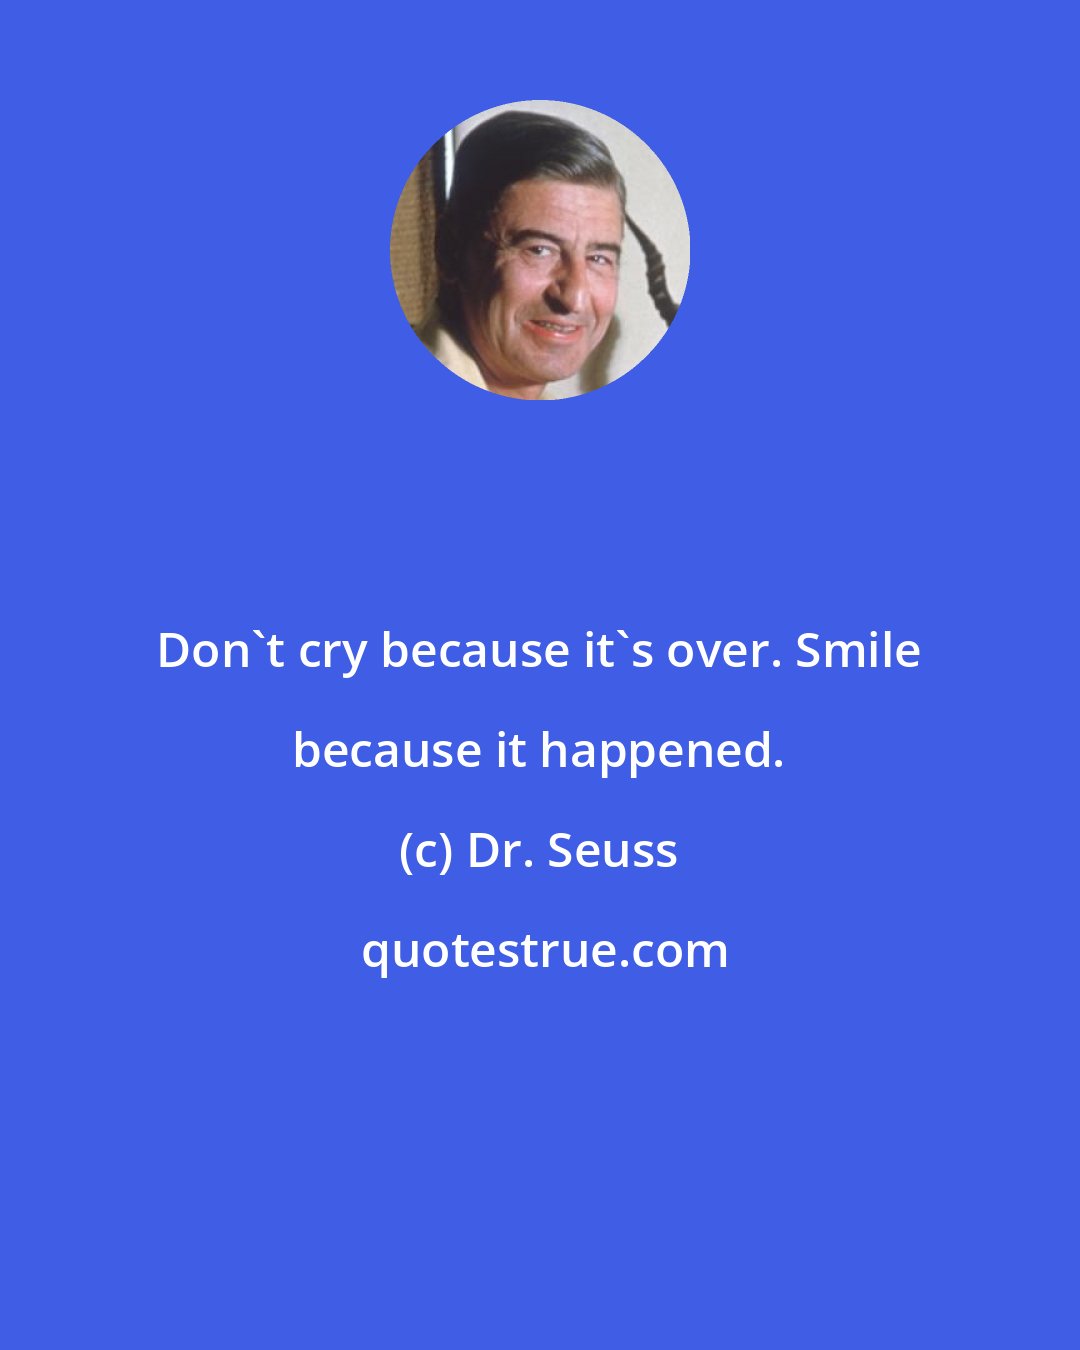 Dr. Seuss: Don't cry because it's over. Smile because it happened.